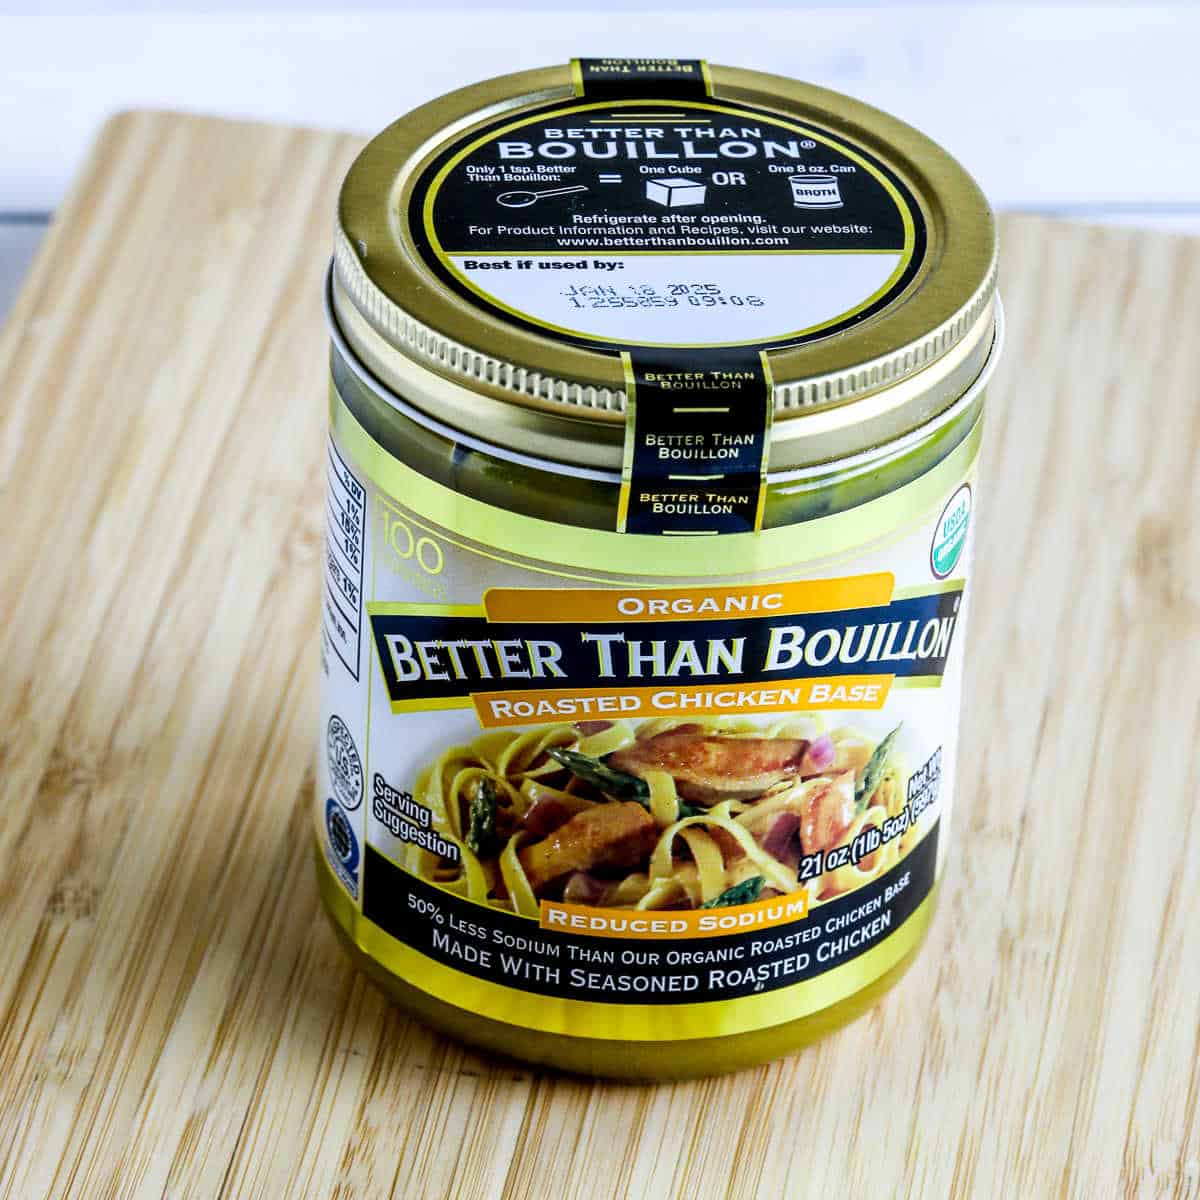 Square image of Better Than Bouillon Organic Roasted Chicken Base jar shown on cutting board.